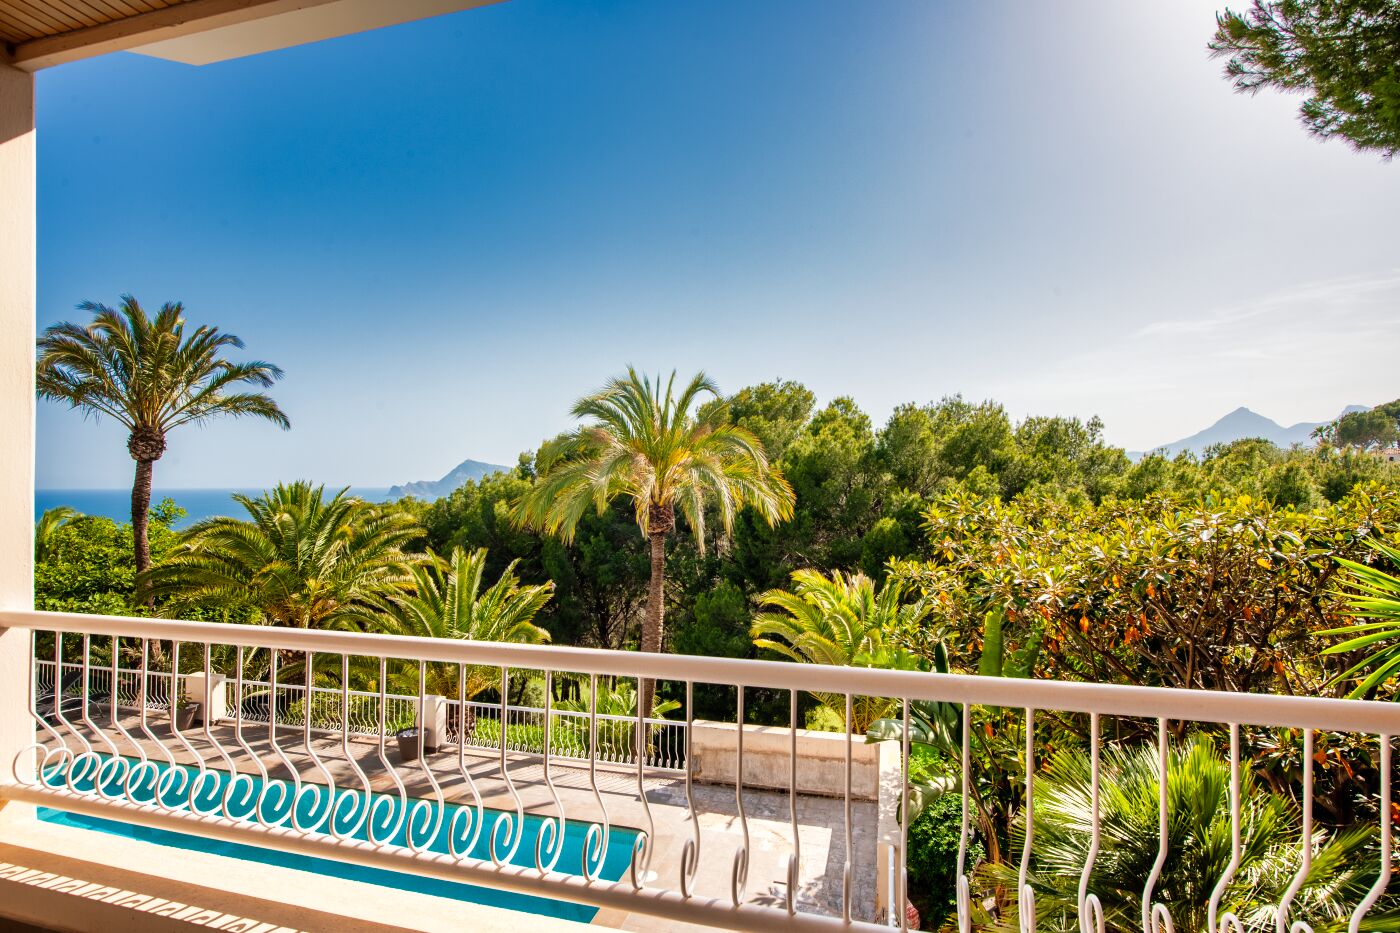 Fantastic villa with a guest apartment for sale in Sierra Altea